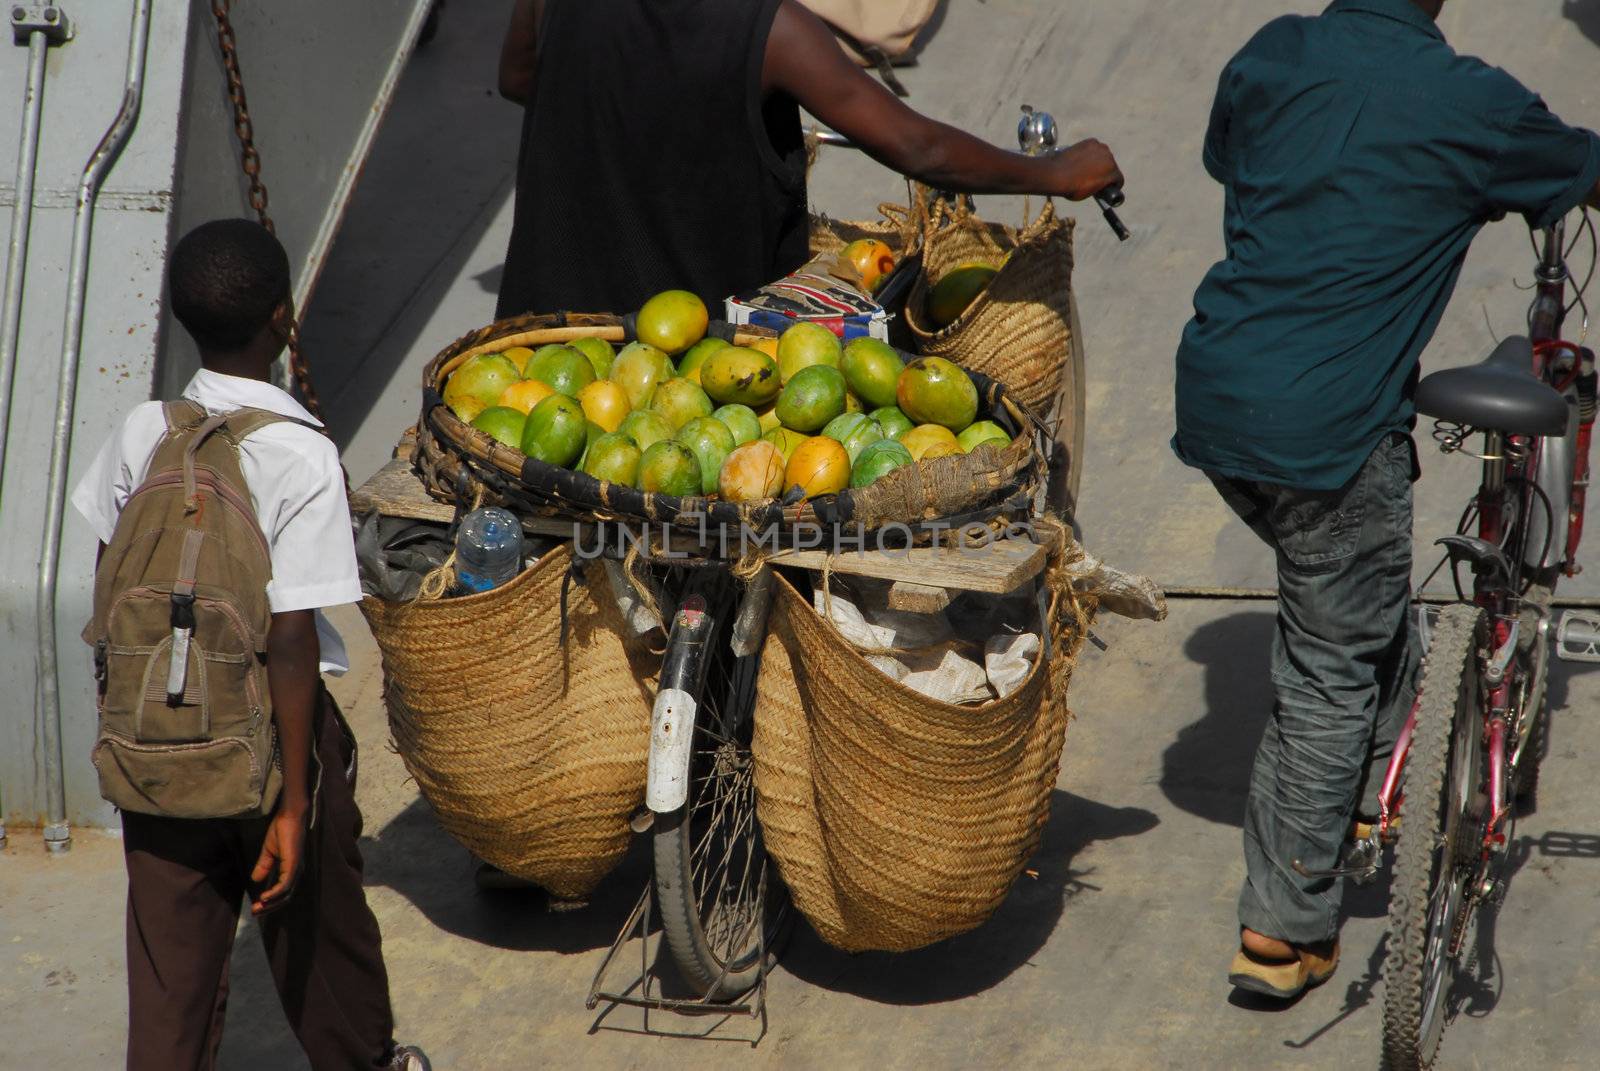 Dar es Salaam, Tanzania in July 2010: peddlers with their wares of fruit go down to the ferry that goes from Dar es Salaam to Kigamboni